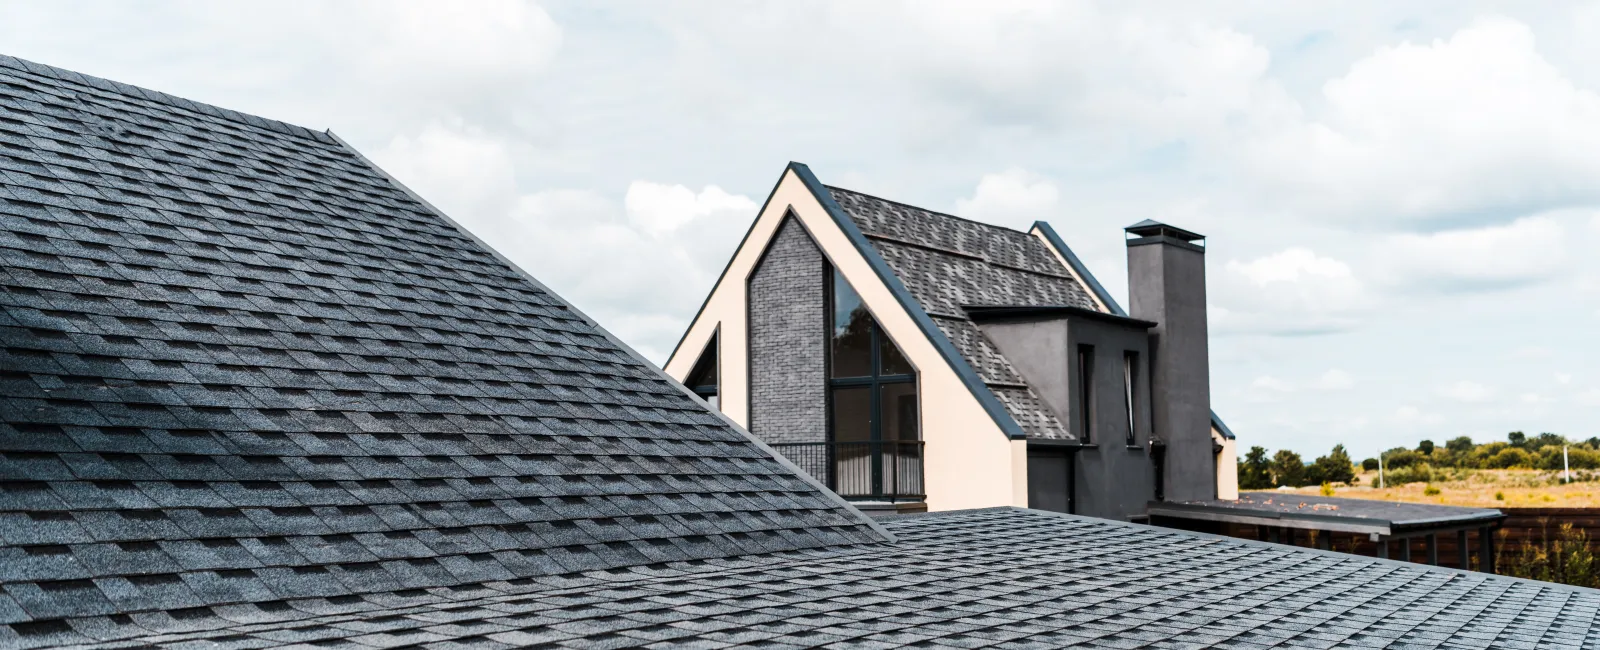 How Do Roof Shingles Make The House More Energy-Efficient?